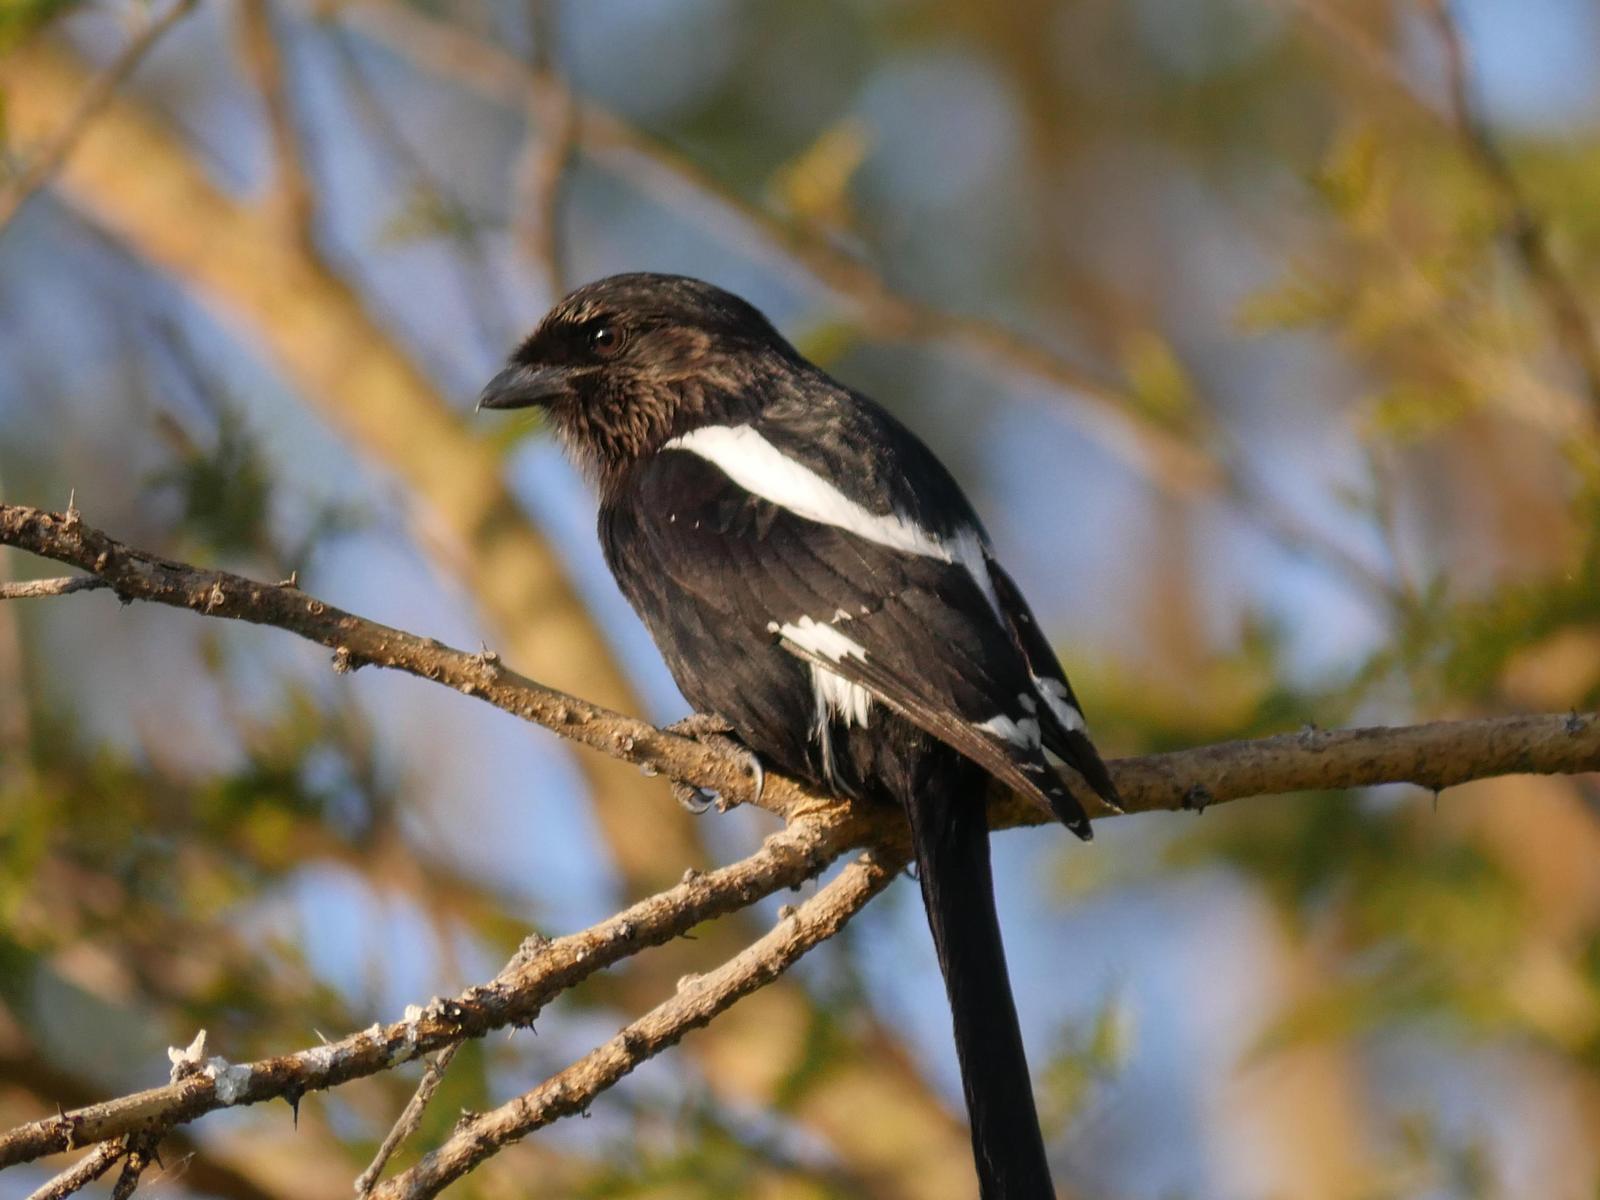 Magpie Shrike Photo by Peter Lowe